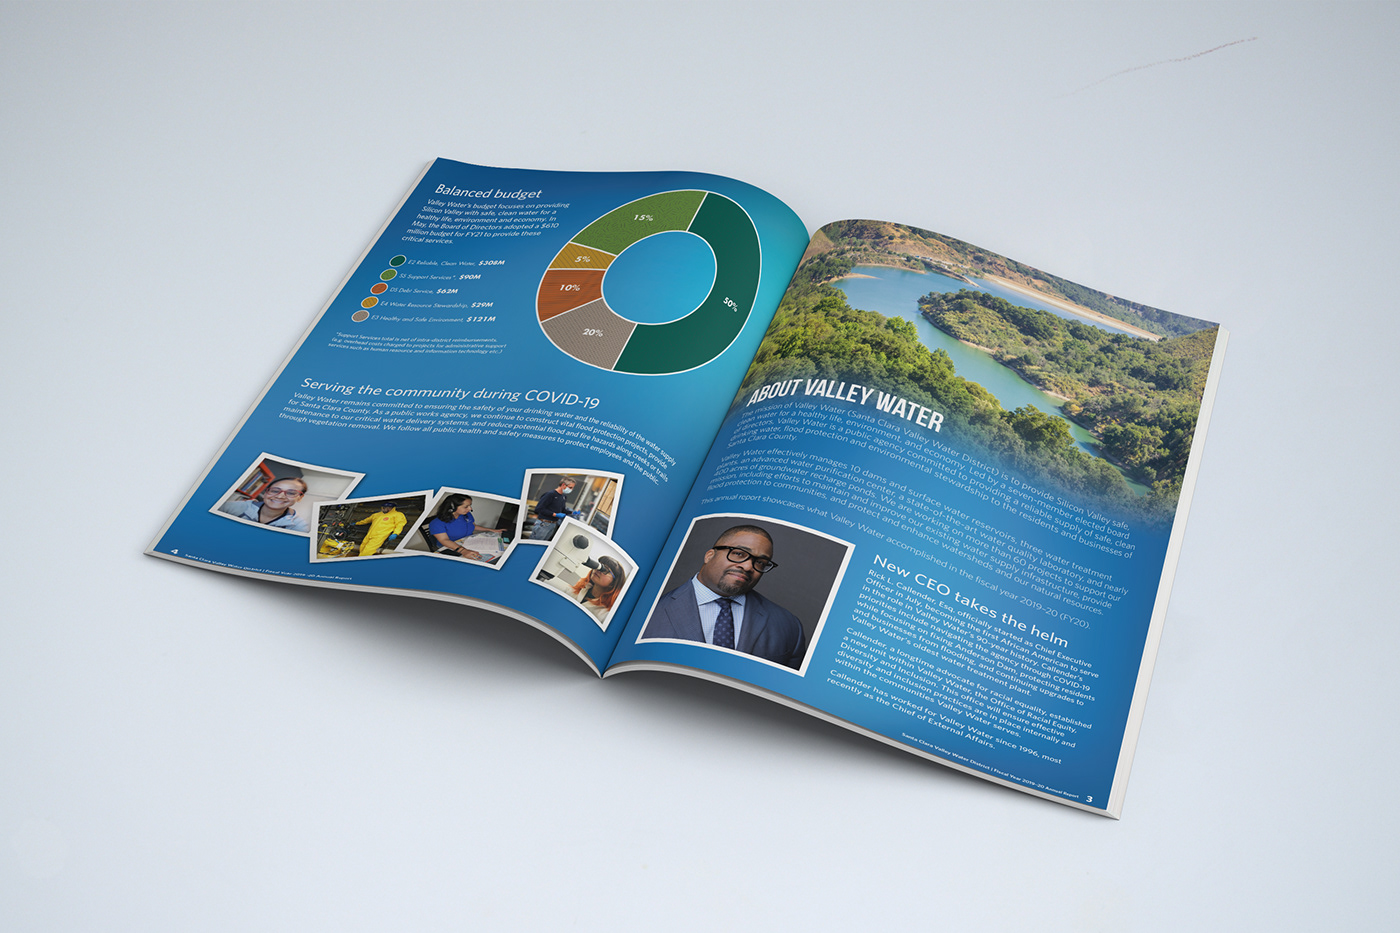 annual report Benjamin apolo Flood protection healthy environment Safe Clean Water Valley Water